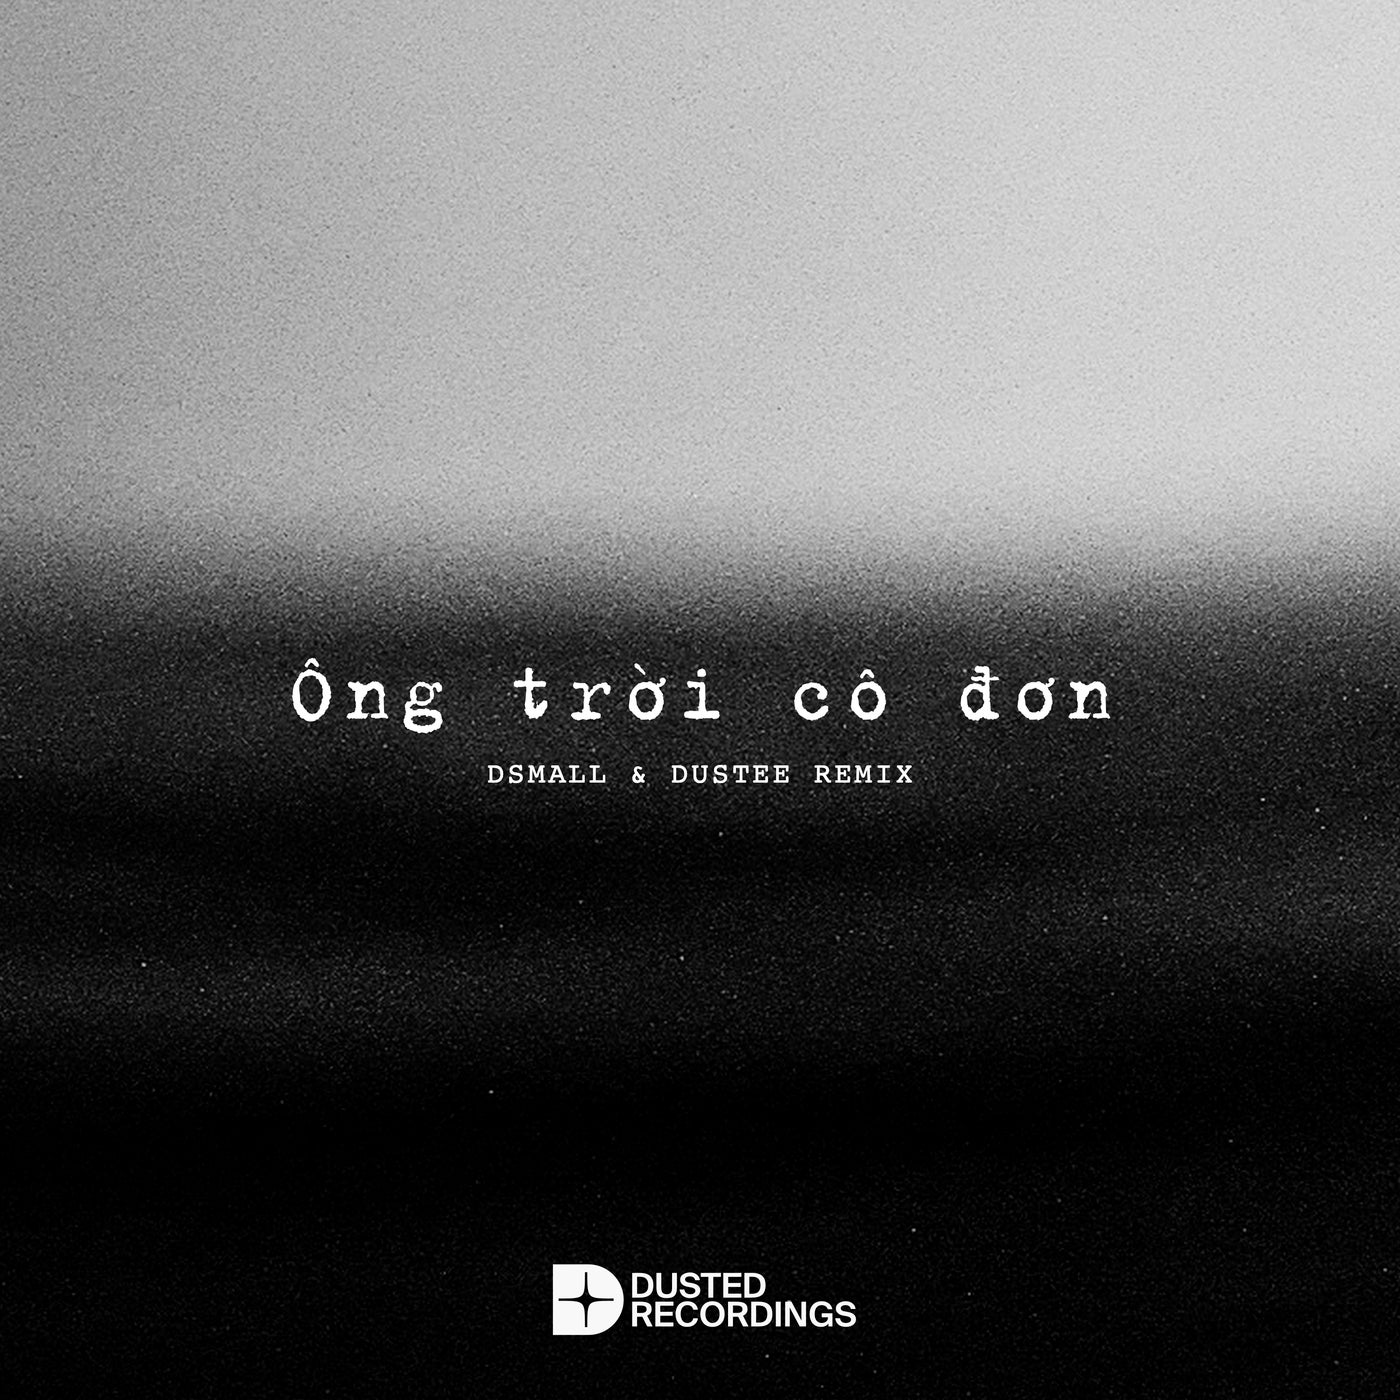 Ong Troi Co Don (DSmall & Dustee Remix)